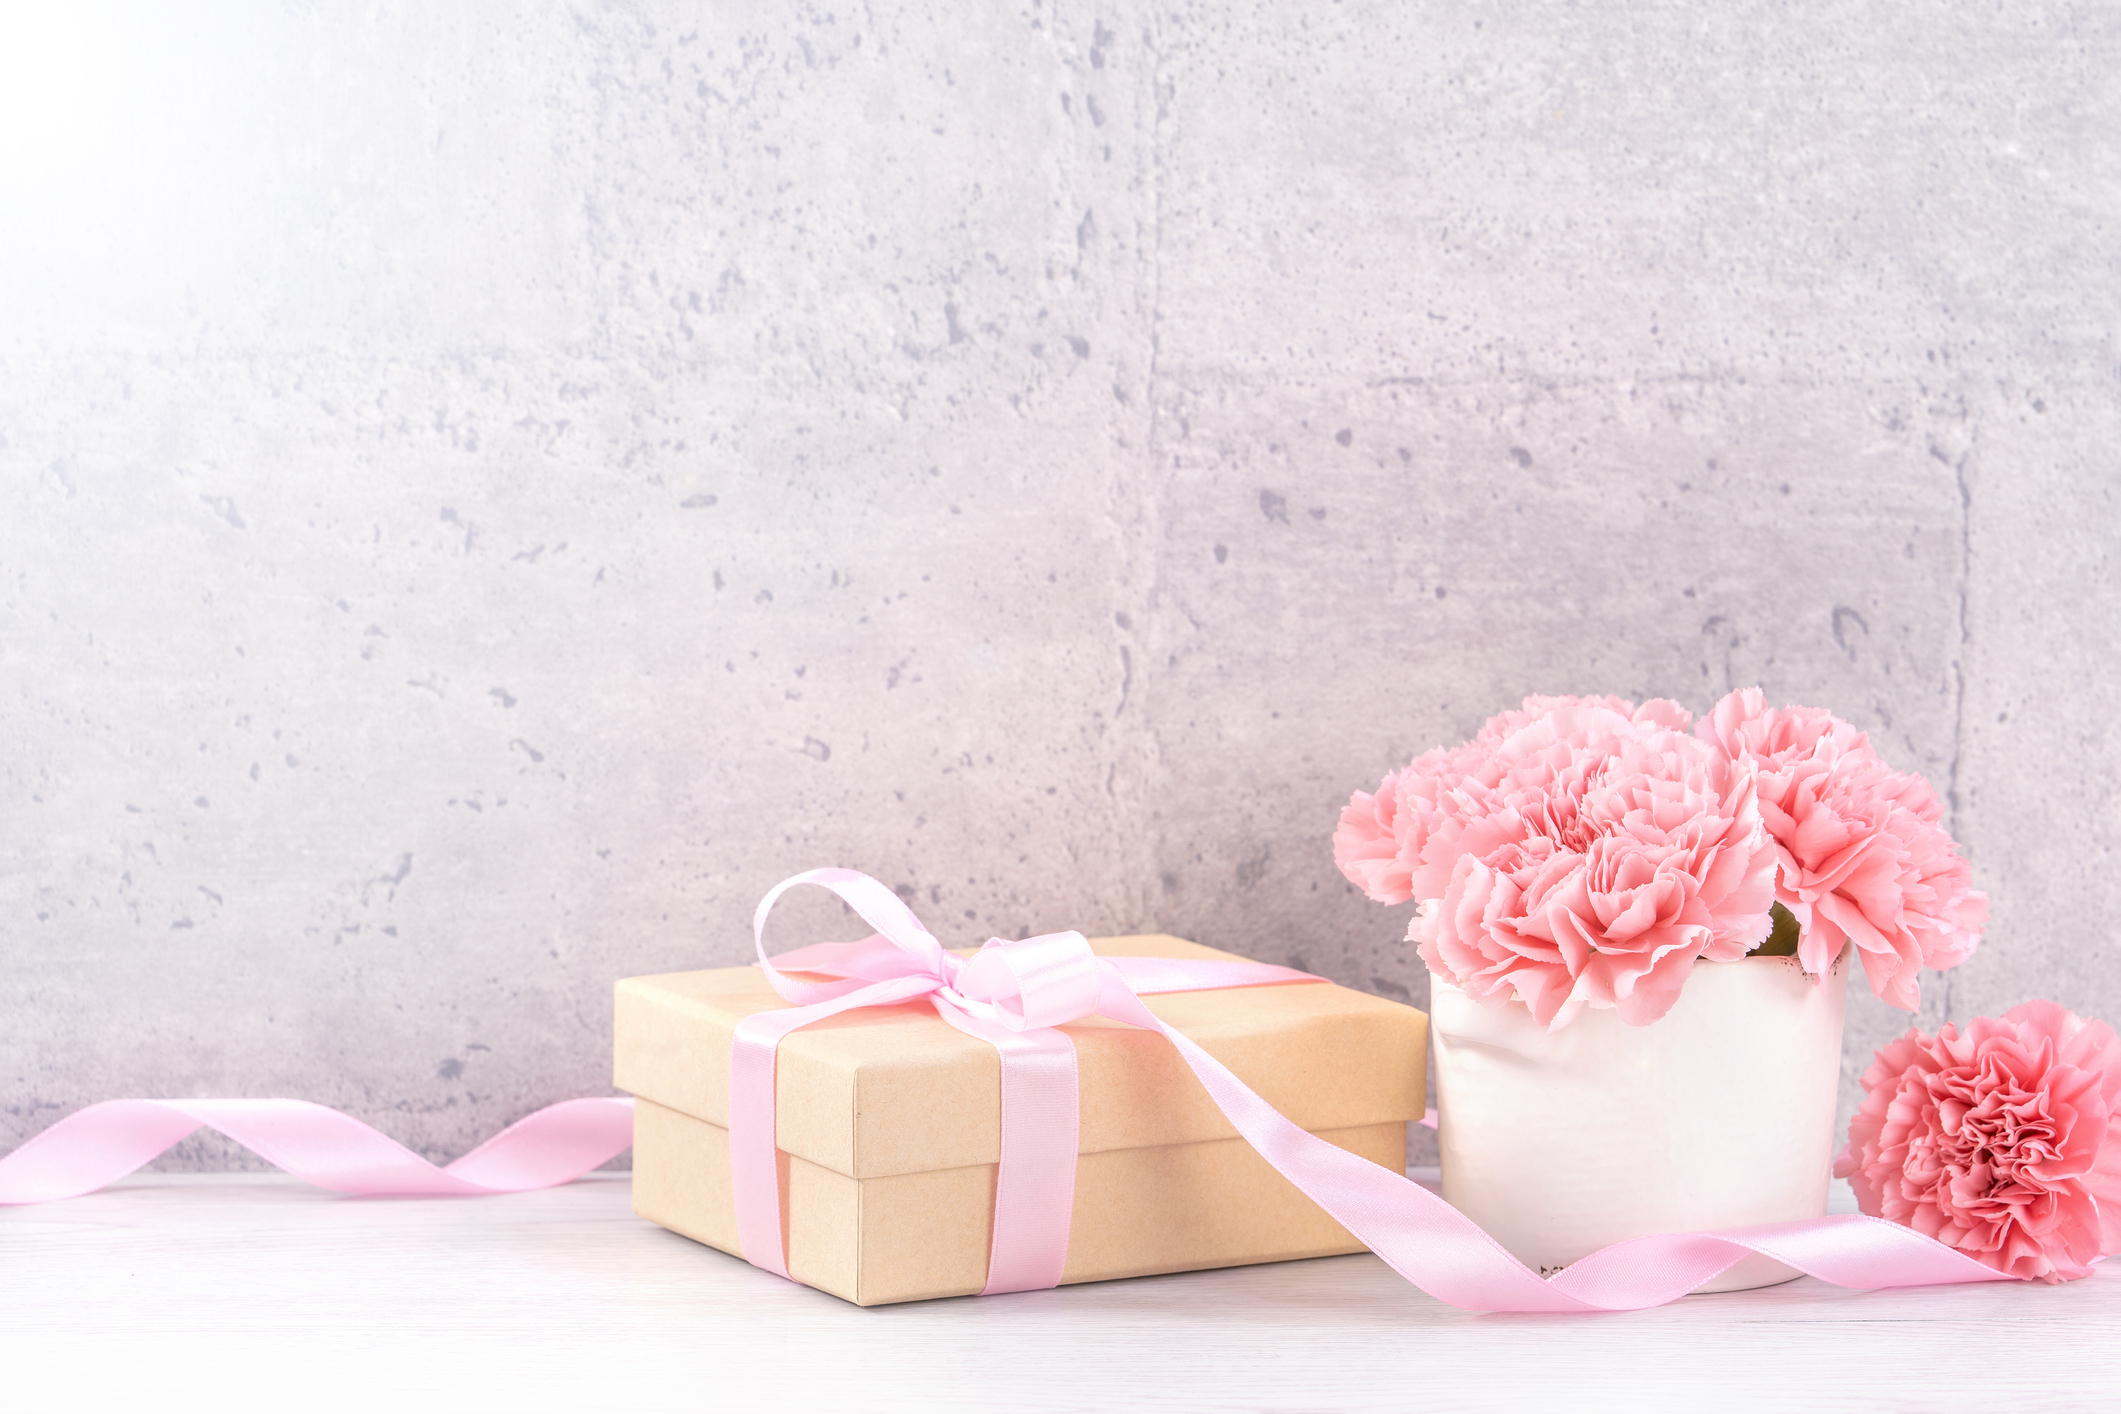 may-mothers-day-handmade-giftbox-wishes-photography-beautiful-blooming-carnations-with-pink-ribbon-box-isolated-on-fair-faced-gray-background-desk-close-up-copy-space-mock-upjpg